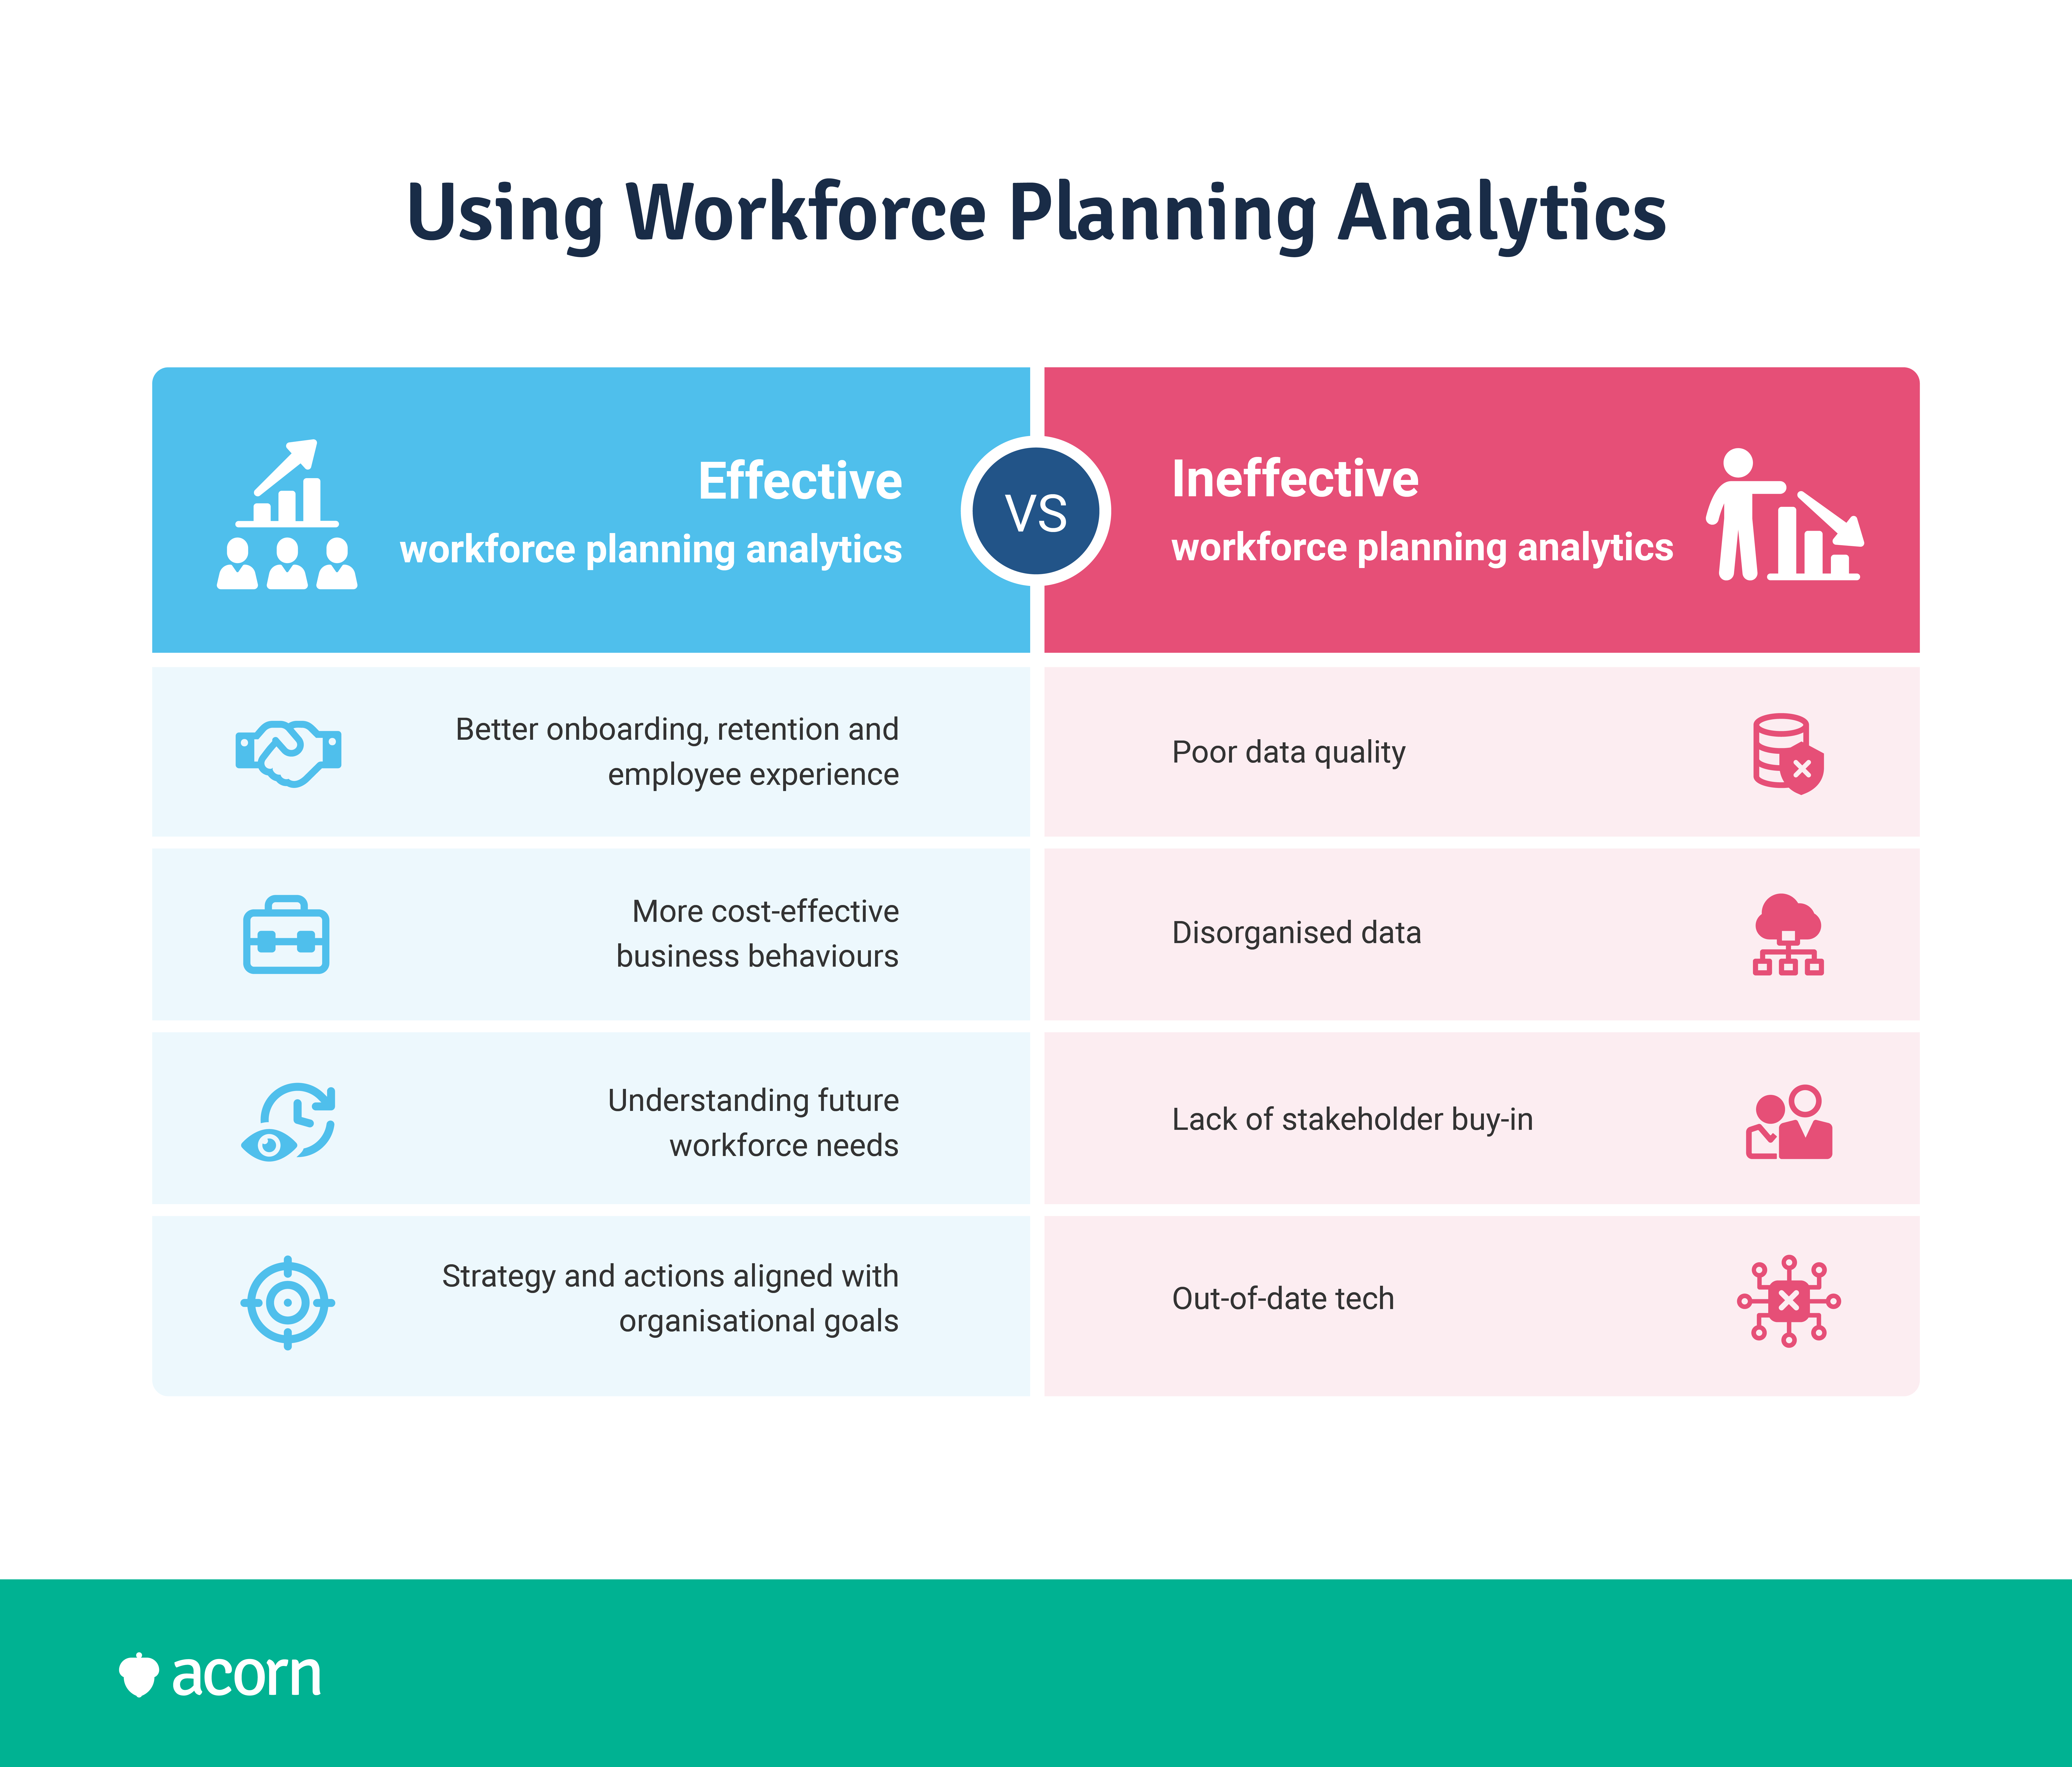 Comparison of using effective and ineffective workforce planning analytics